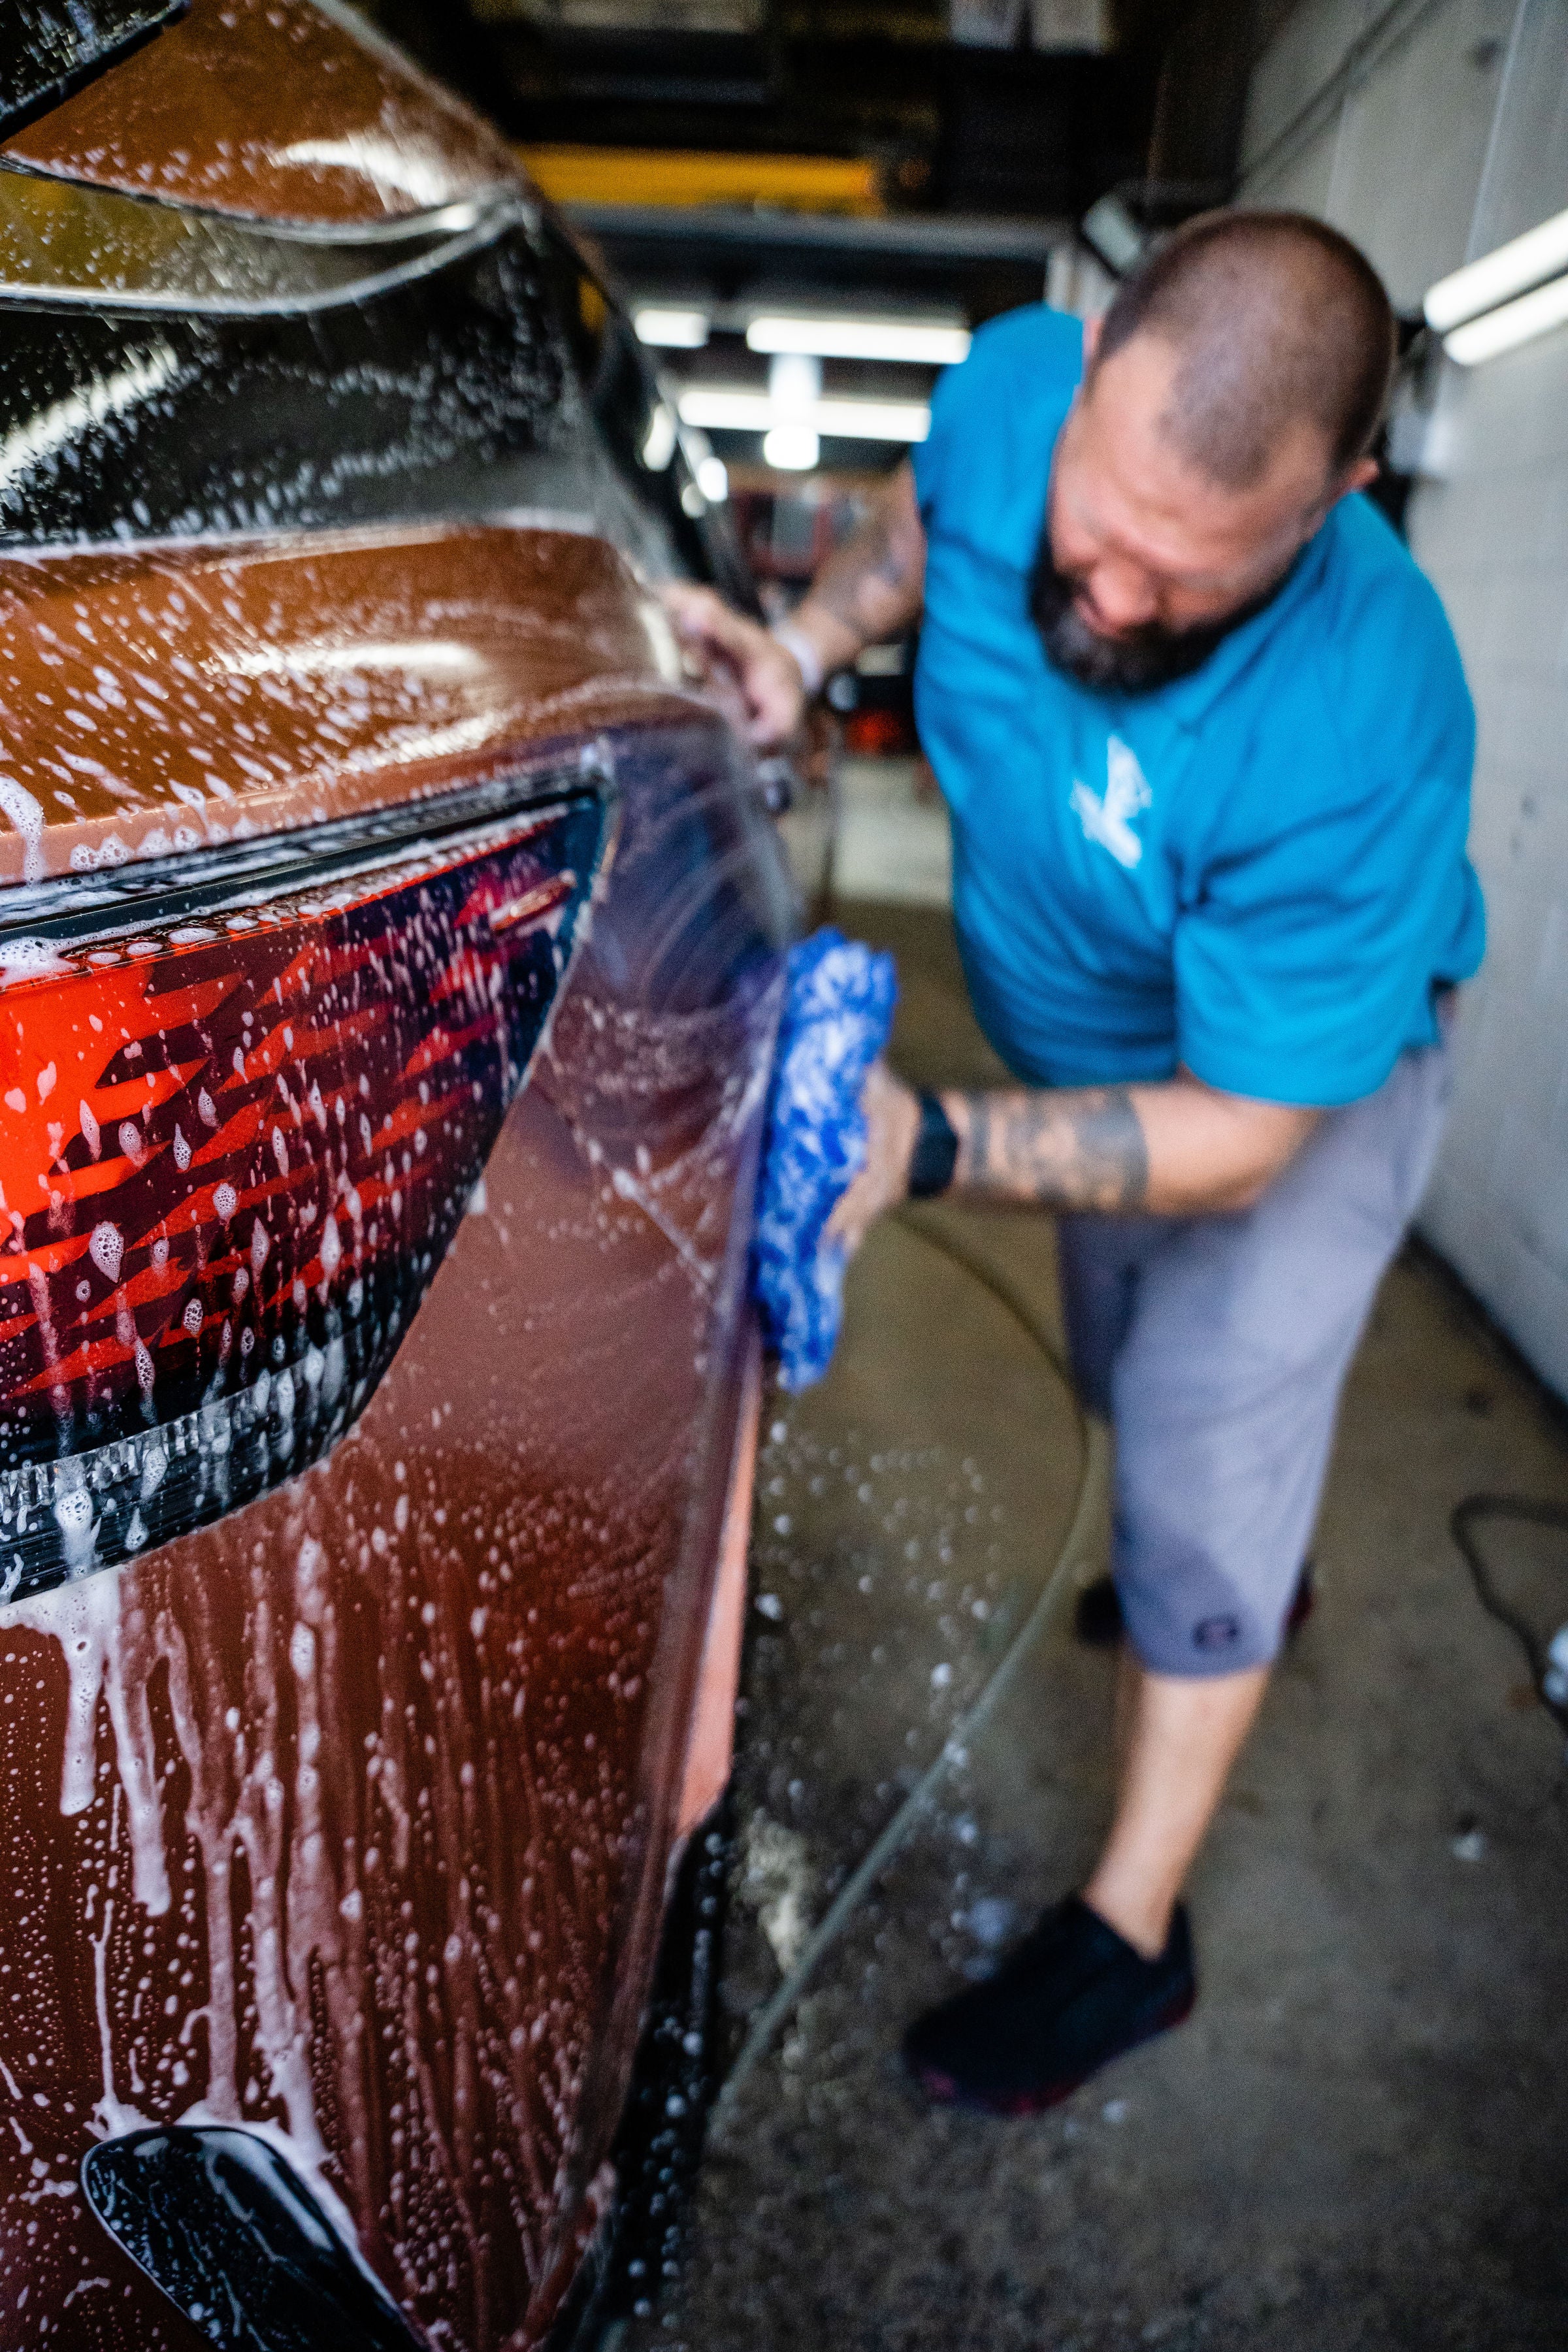 Check out our product spotlight videos and blog posts so you know how to use your auto detail products and make your car look like it just came out of the showroom!